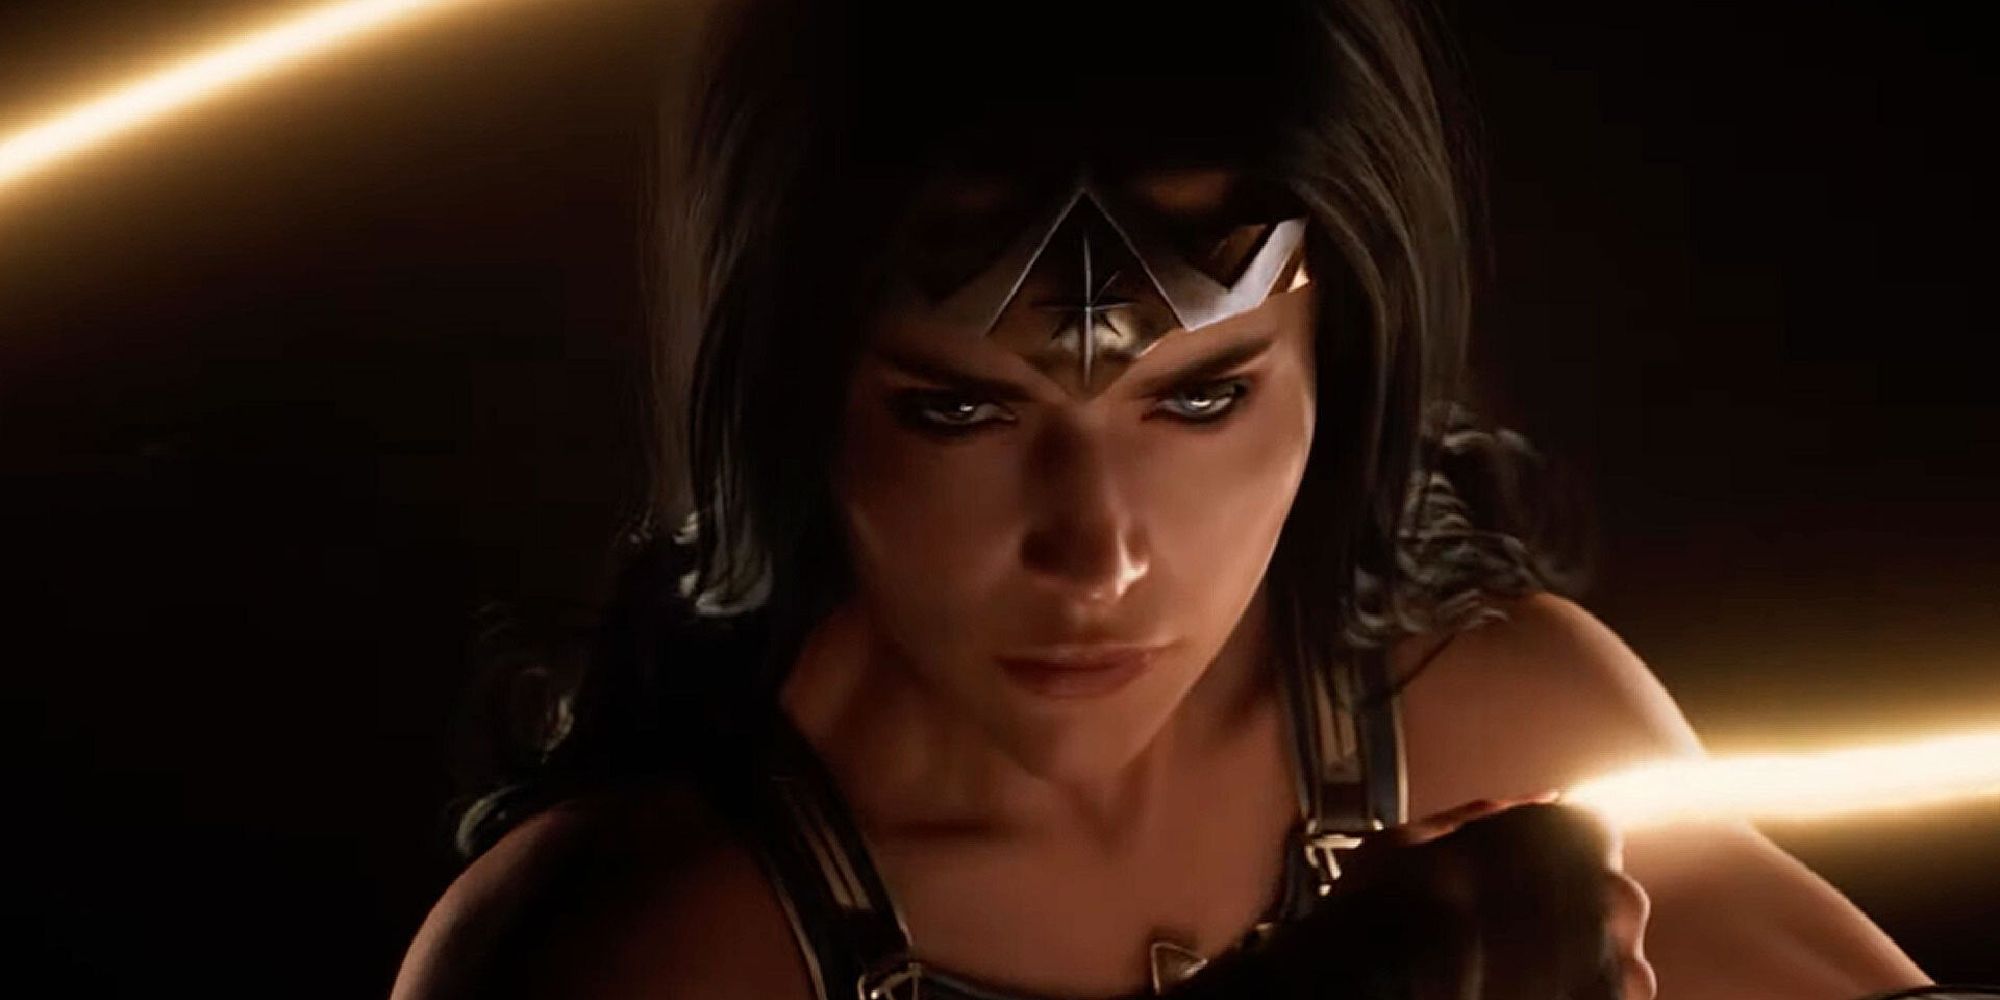 Monoliths Wonder Woman game showing a CGI render of the main character holding the Lasso of Truth